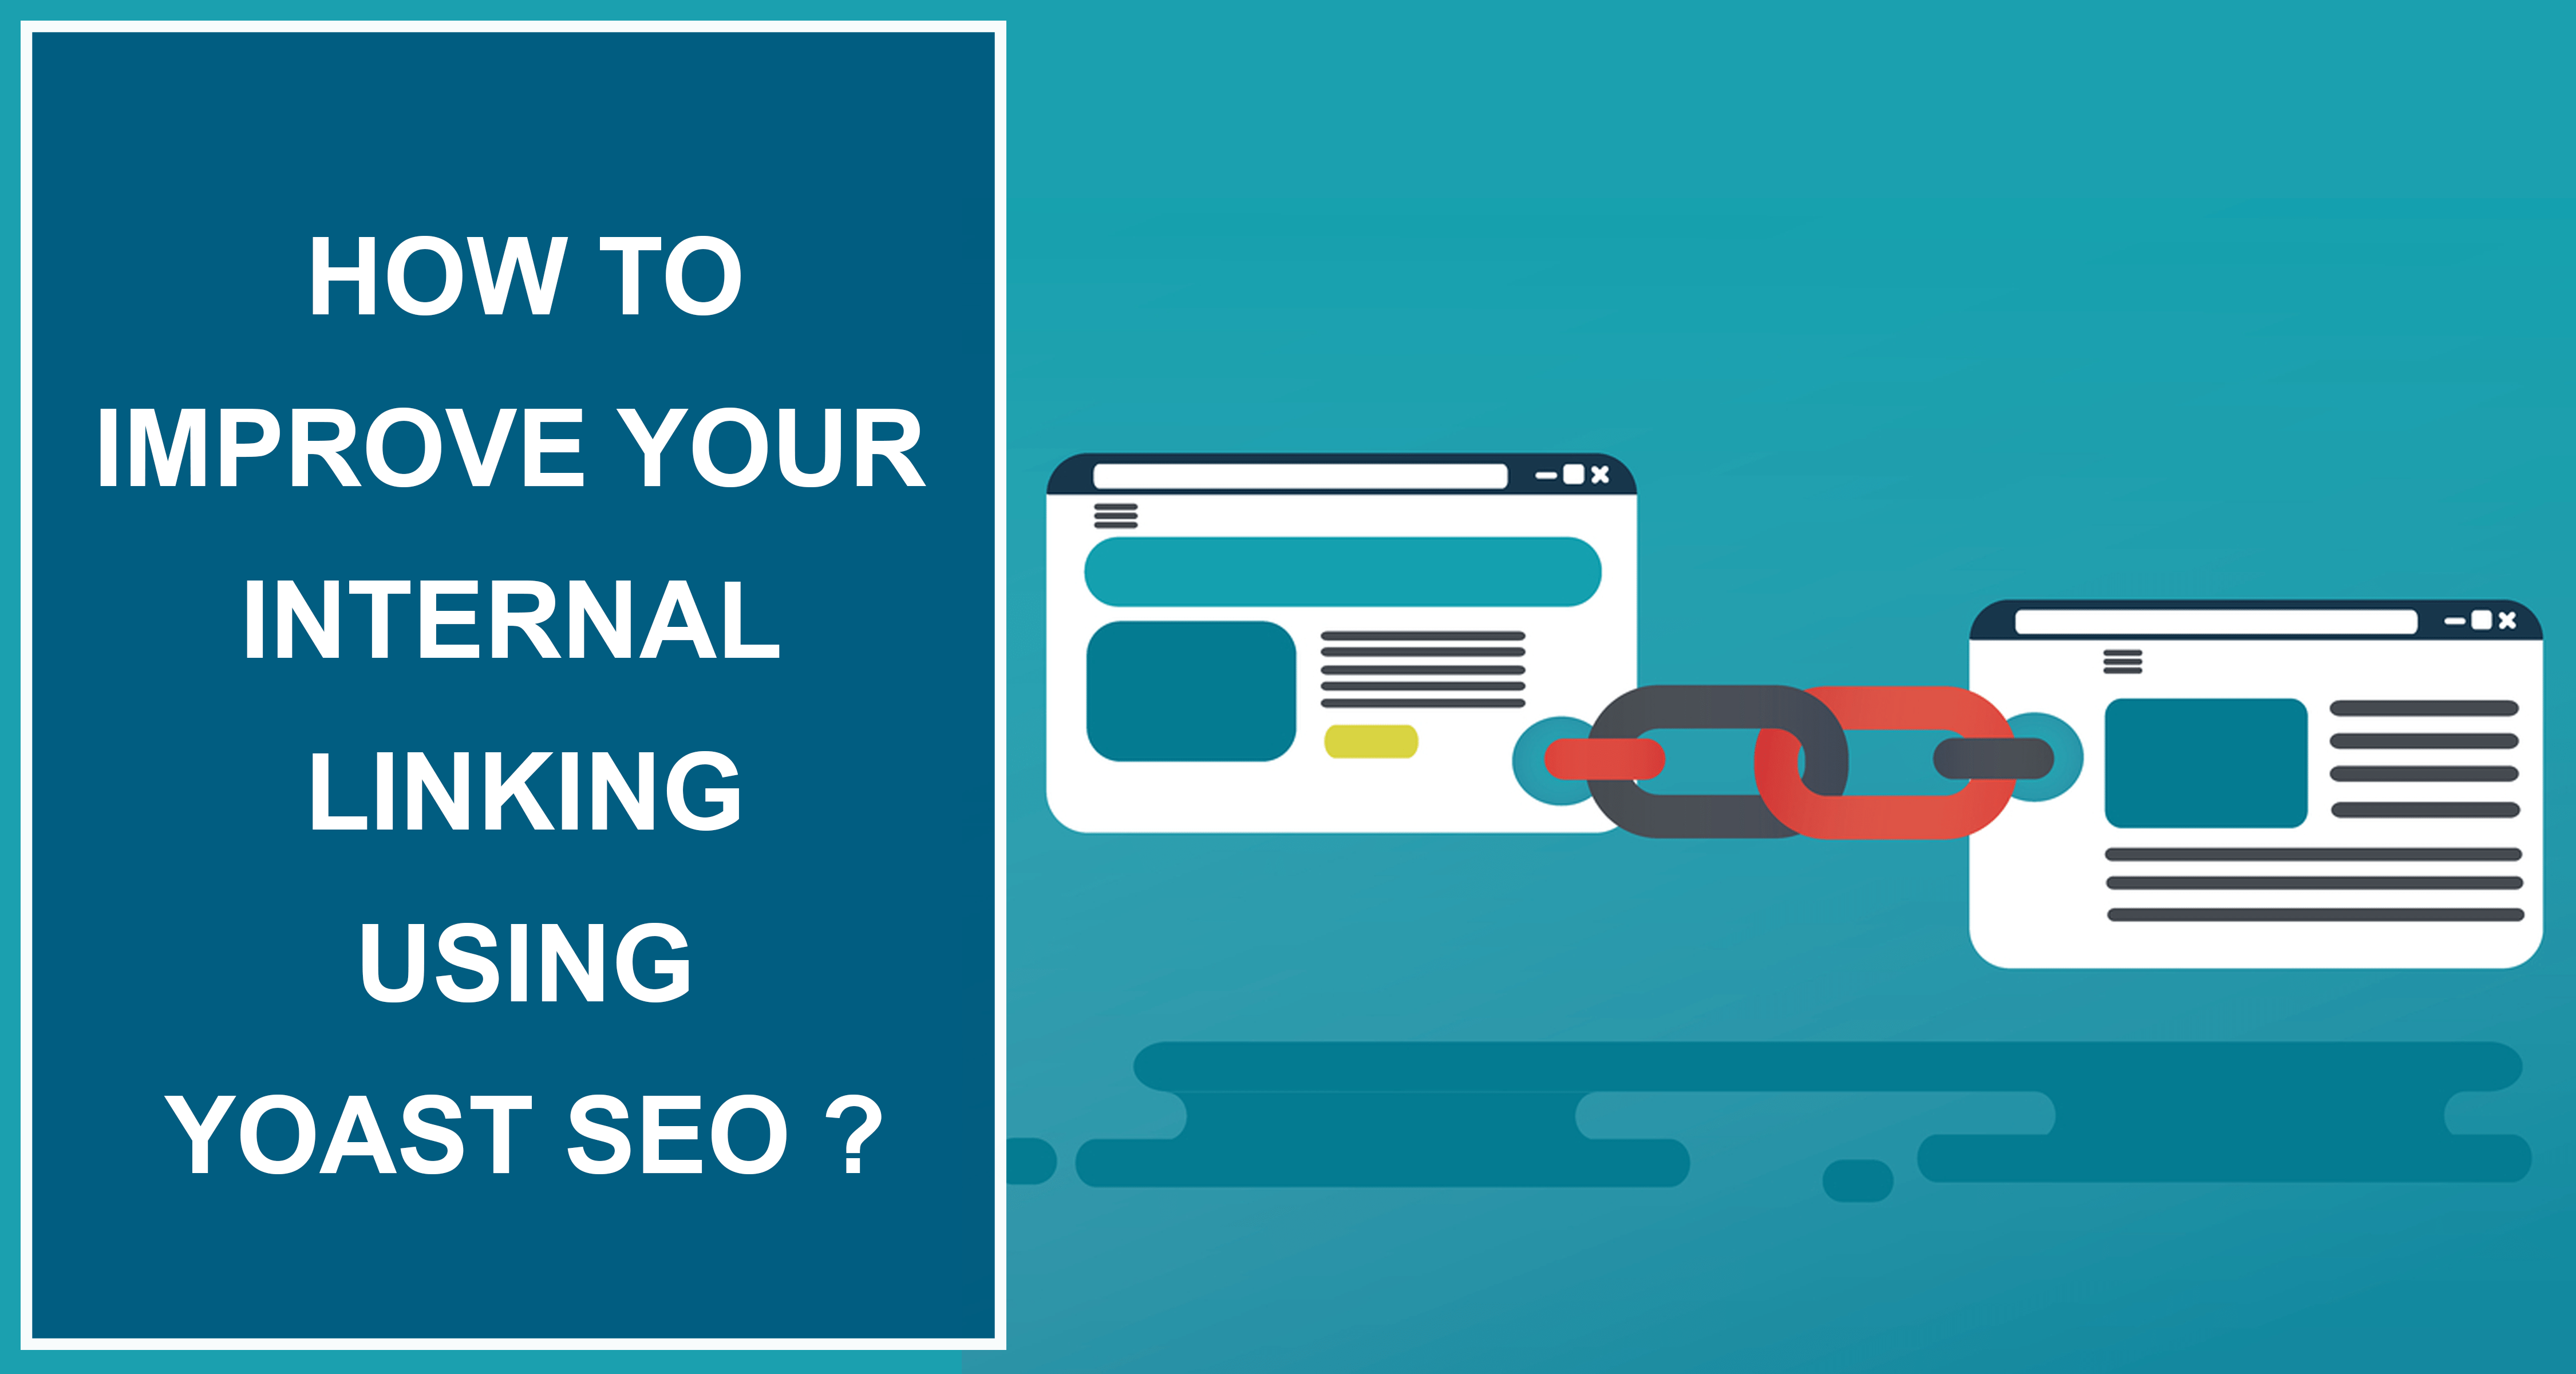 How To Improve Your Internal Linking In WordPress Using Yoast SEO